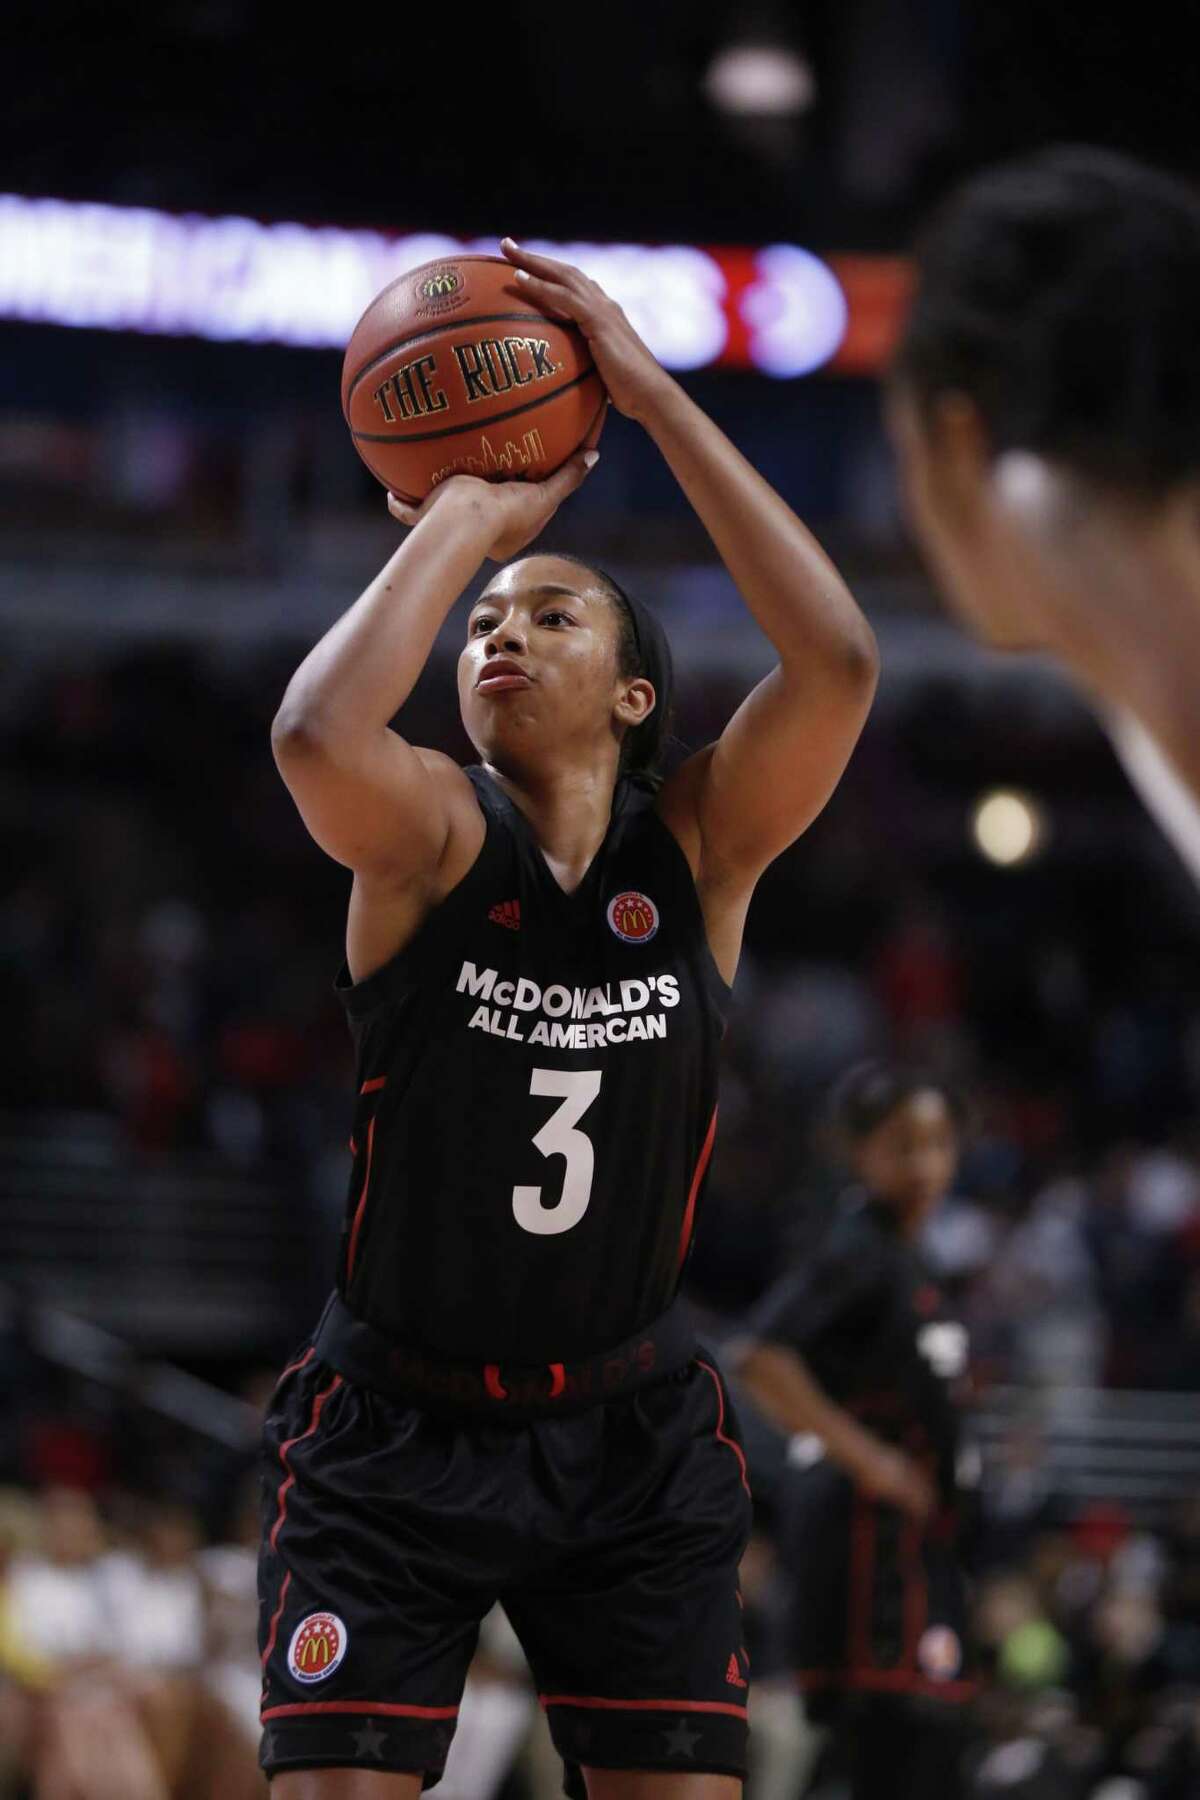 Megan Walker shoots a free throw during the McDonald’s All-American game on March 29 in Chicago.